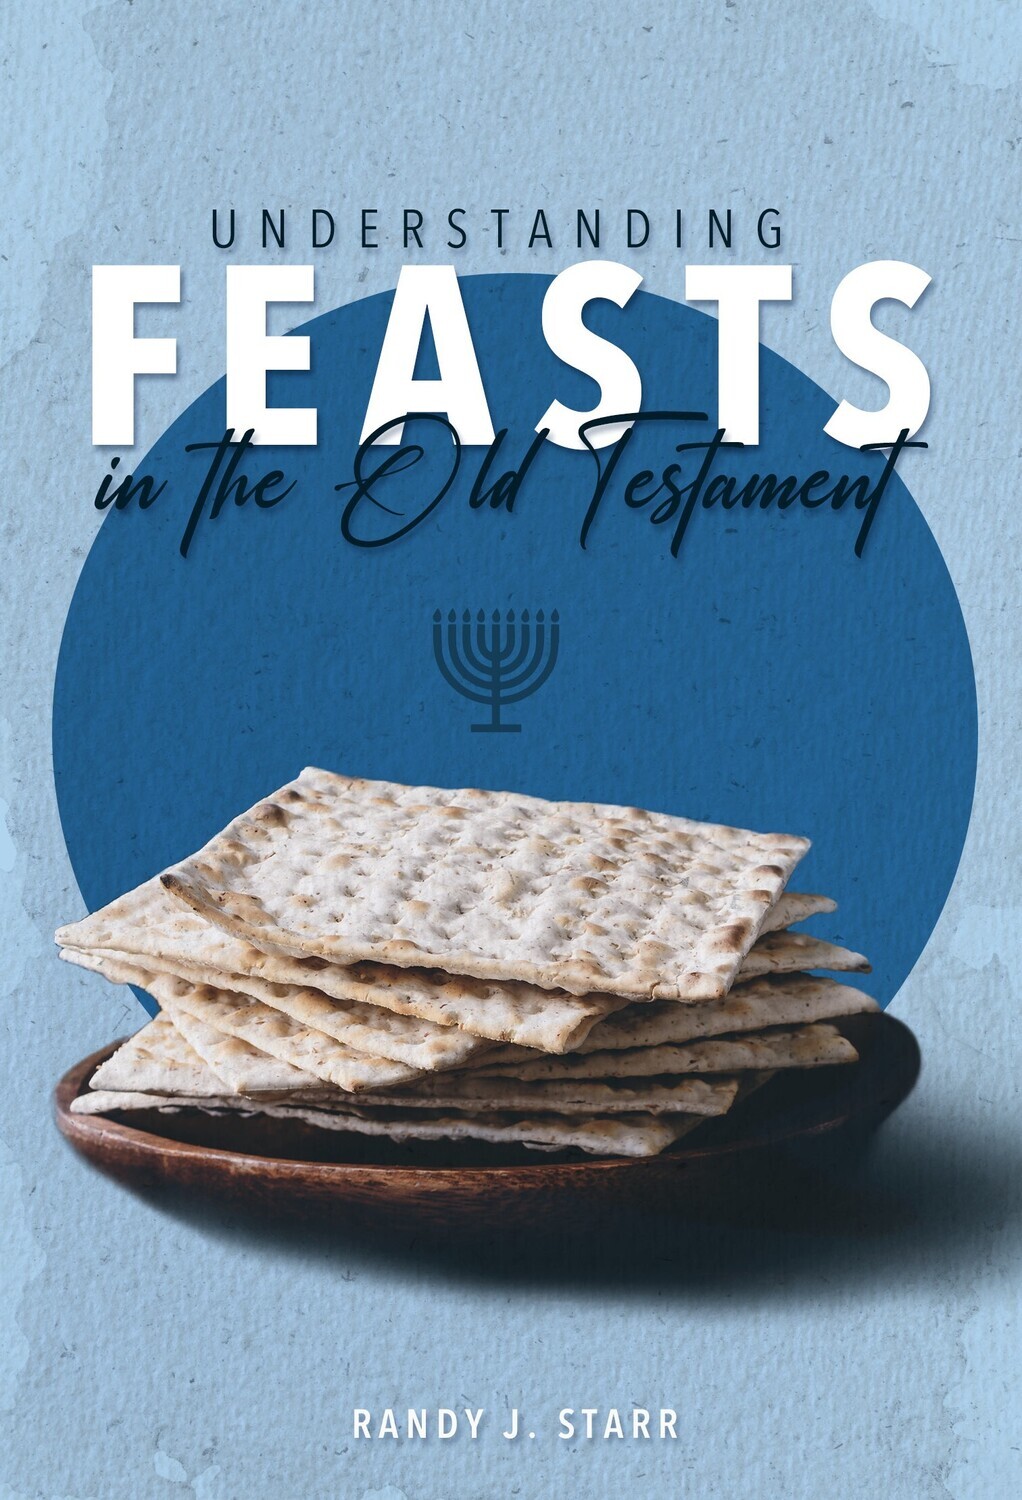 FEASTS of the Old Testament